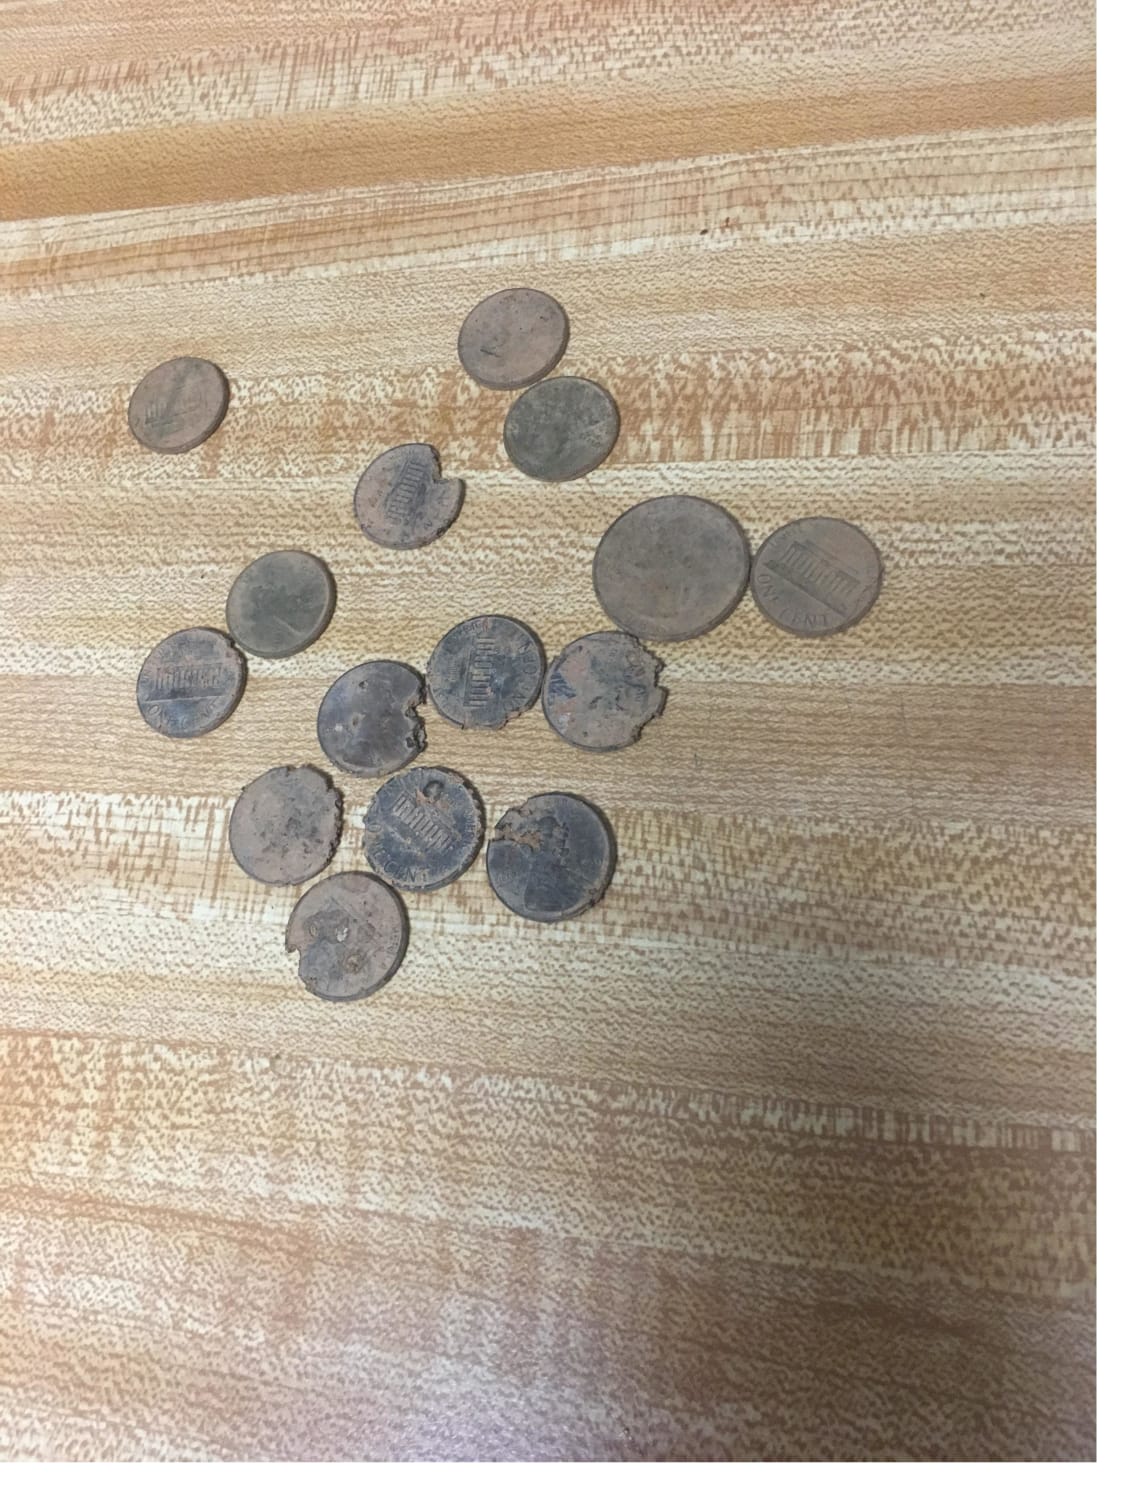 Years ago I was a stupid fucking kid who tossed a shitload of change in the front yard thinking it’d be a fun treasure hunt... today with the help of the metal detector my sister got for Christmas, I finally found the rest of it!